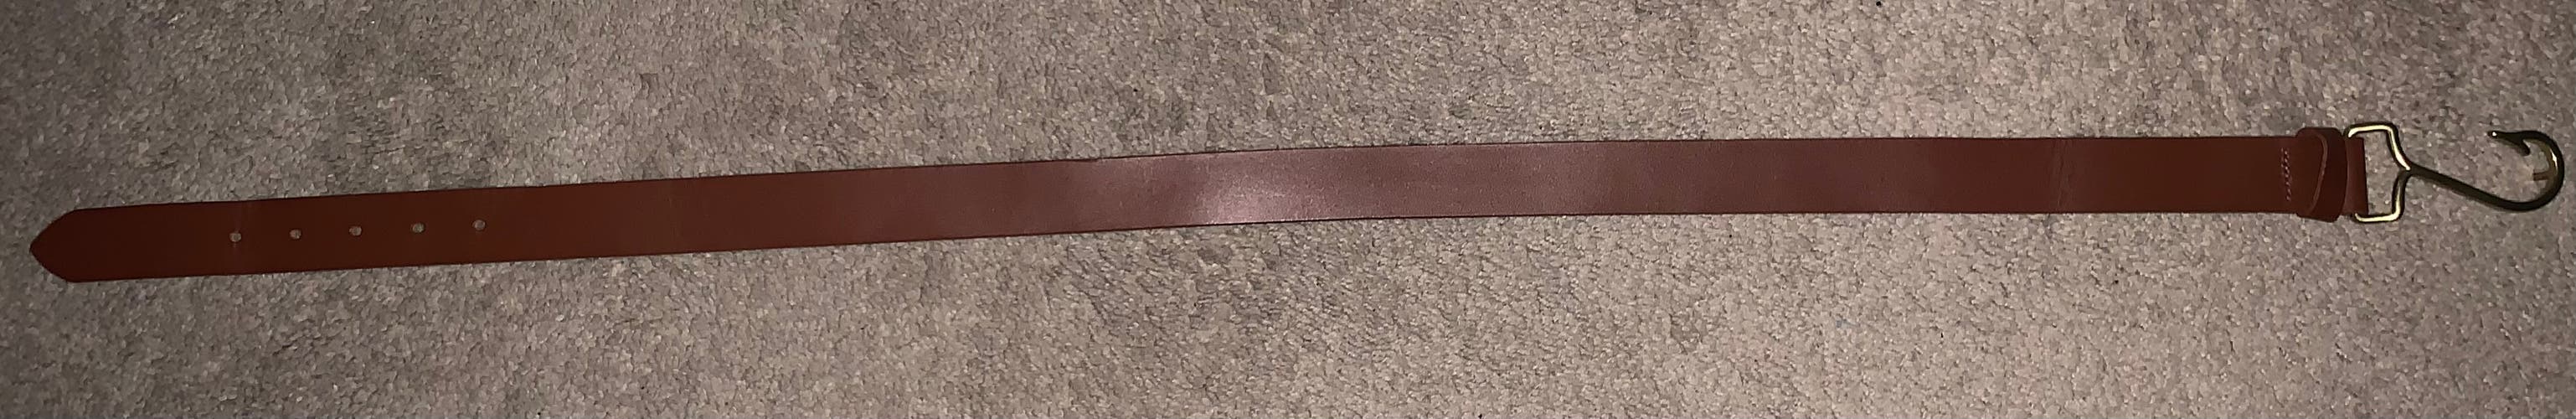 New w/out Tags Brown Leather Belt w/ Brass Fish Hook Buckle by Country Club Prep Size 32